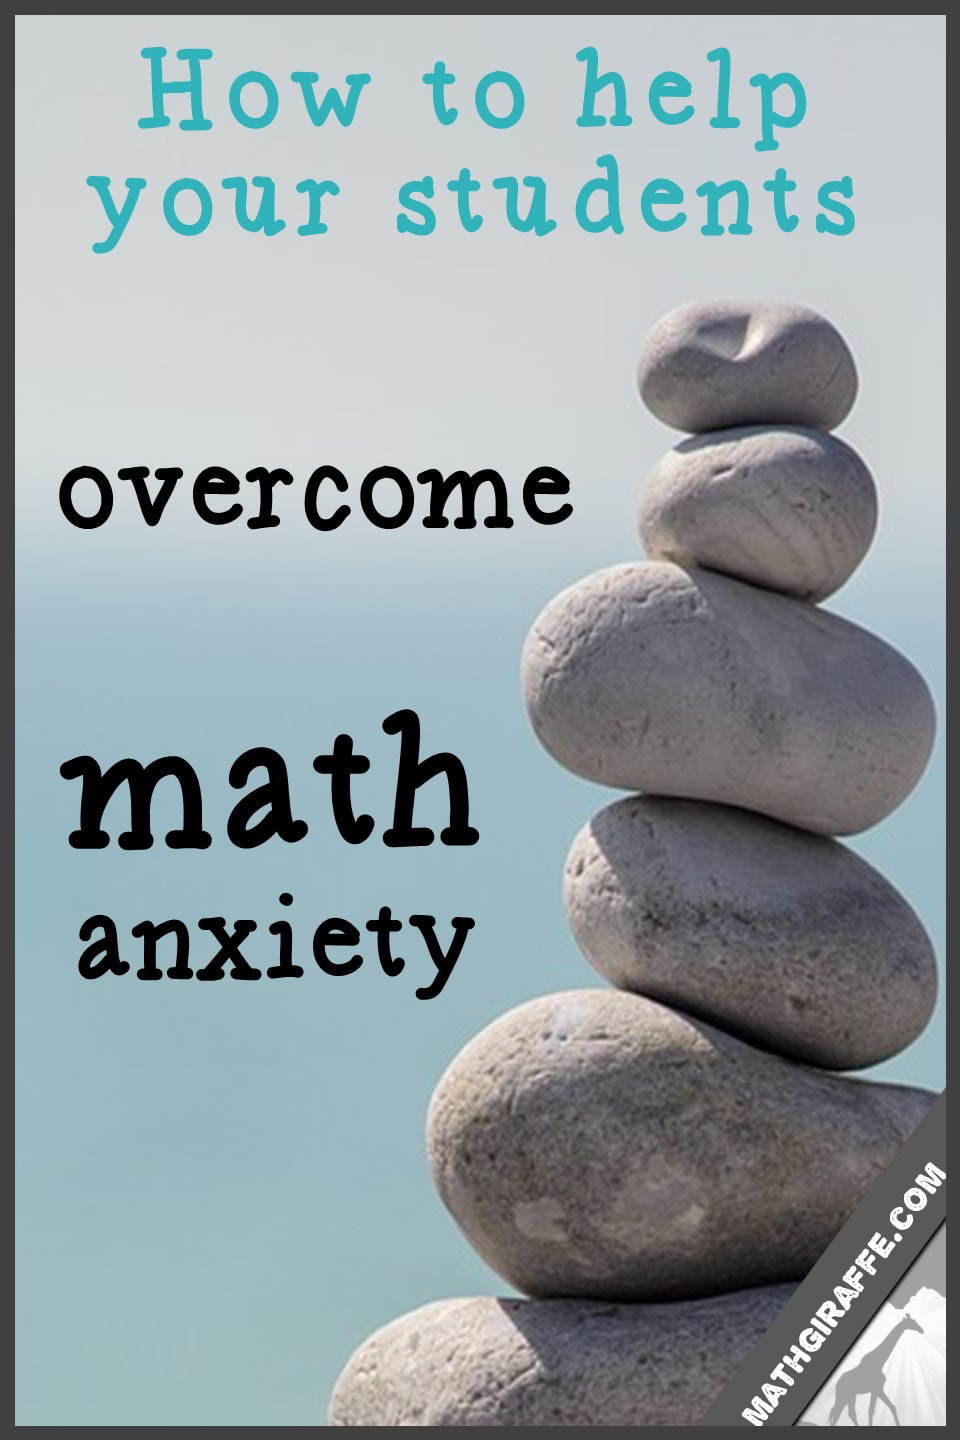 Help Your Students Overcome Math Anxiety